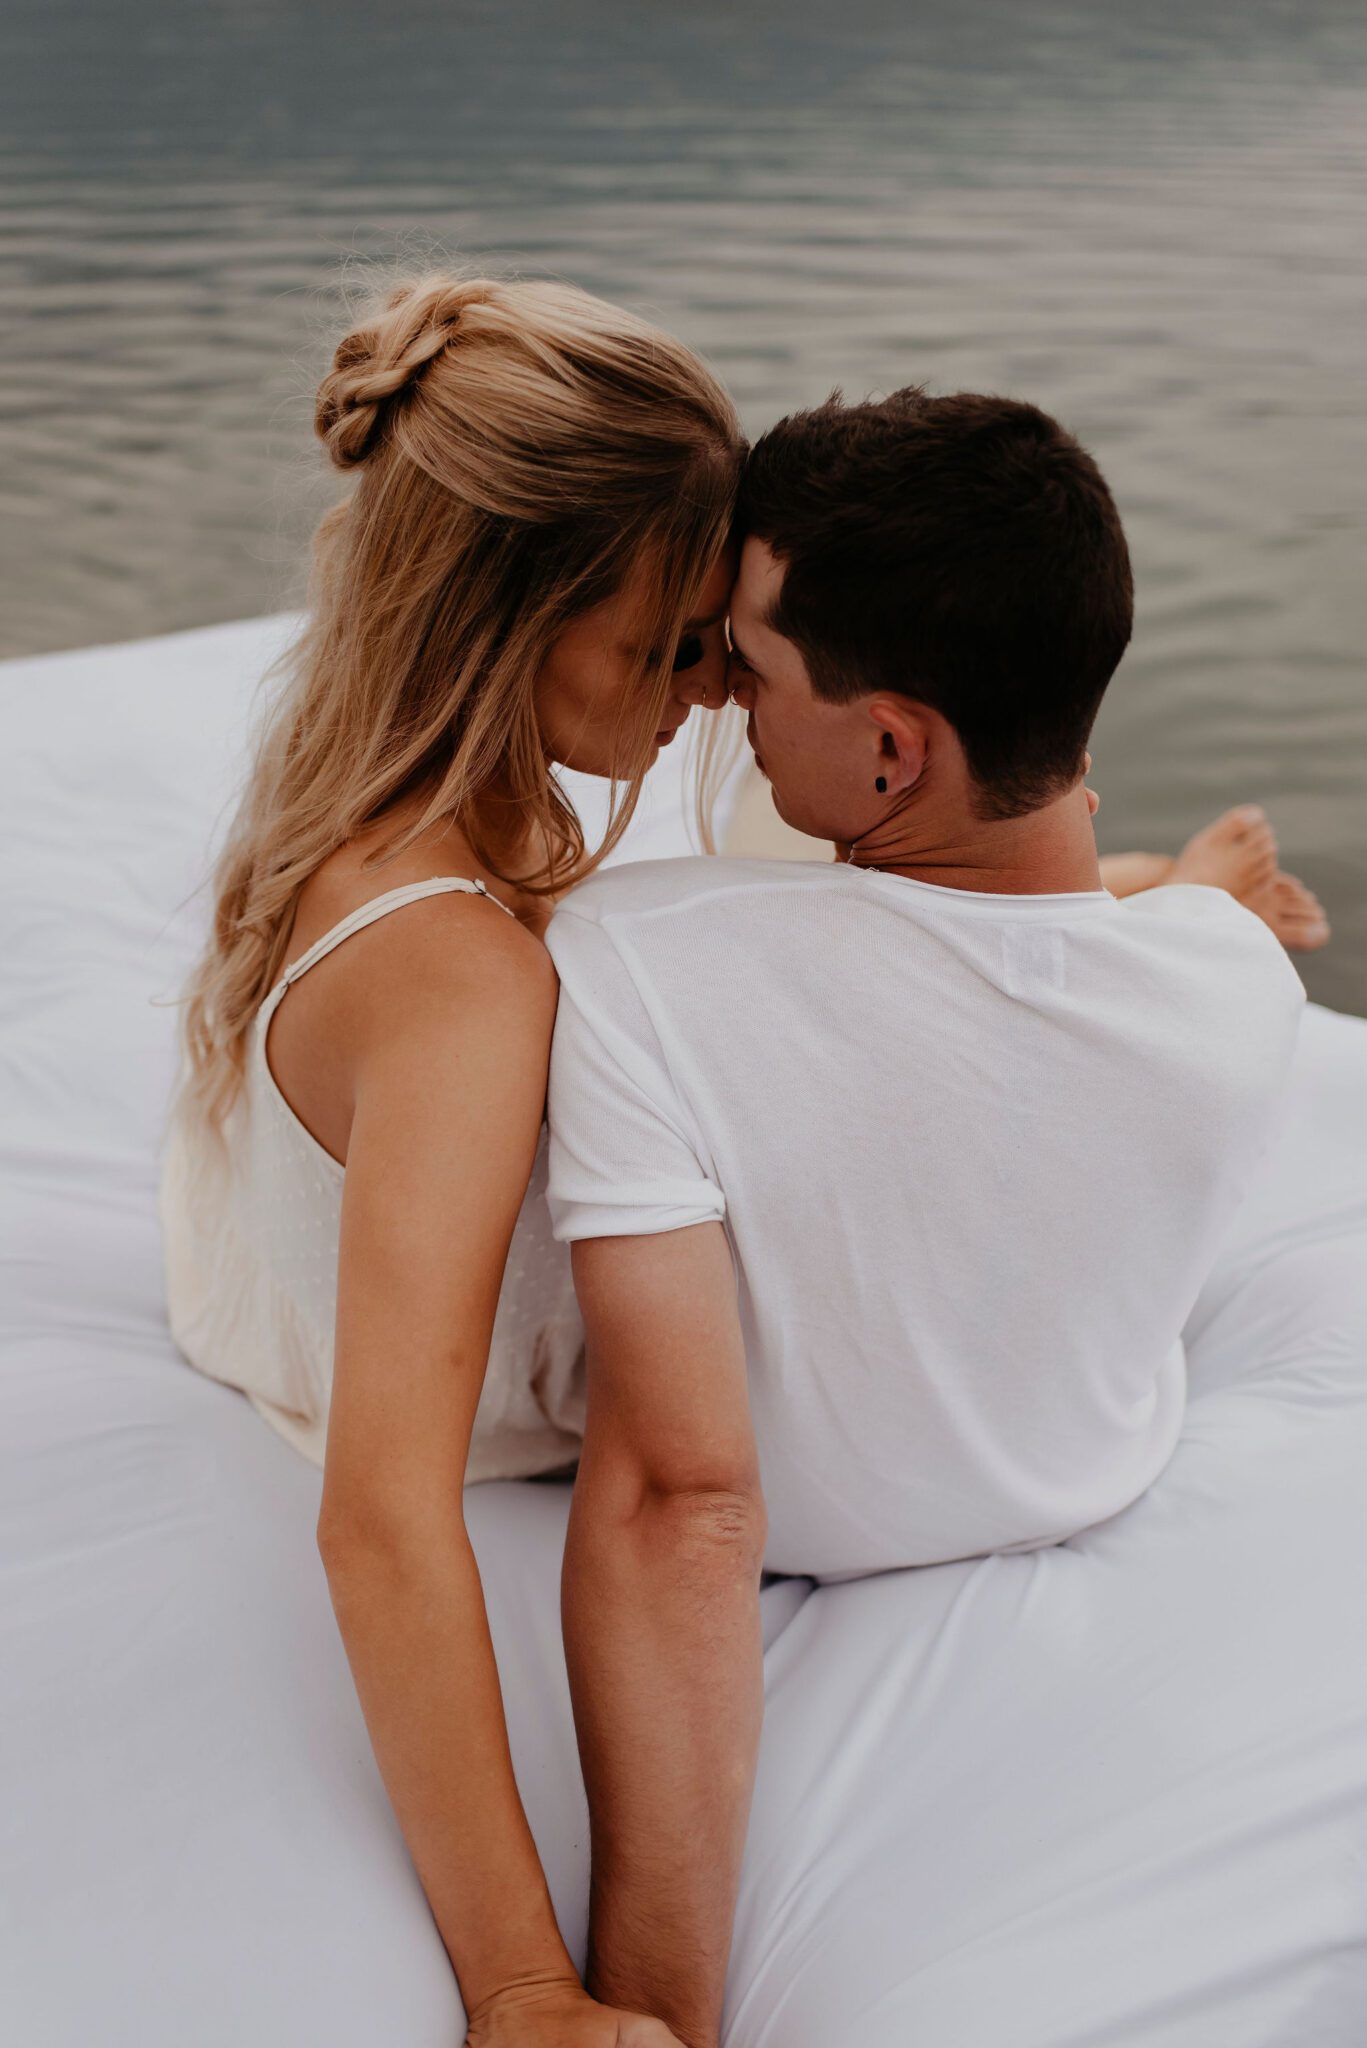 Couple sitting on a floating mattress, engagement session inspiration.